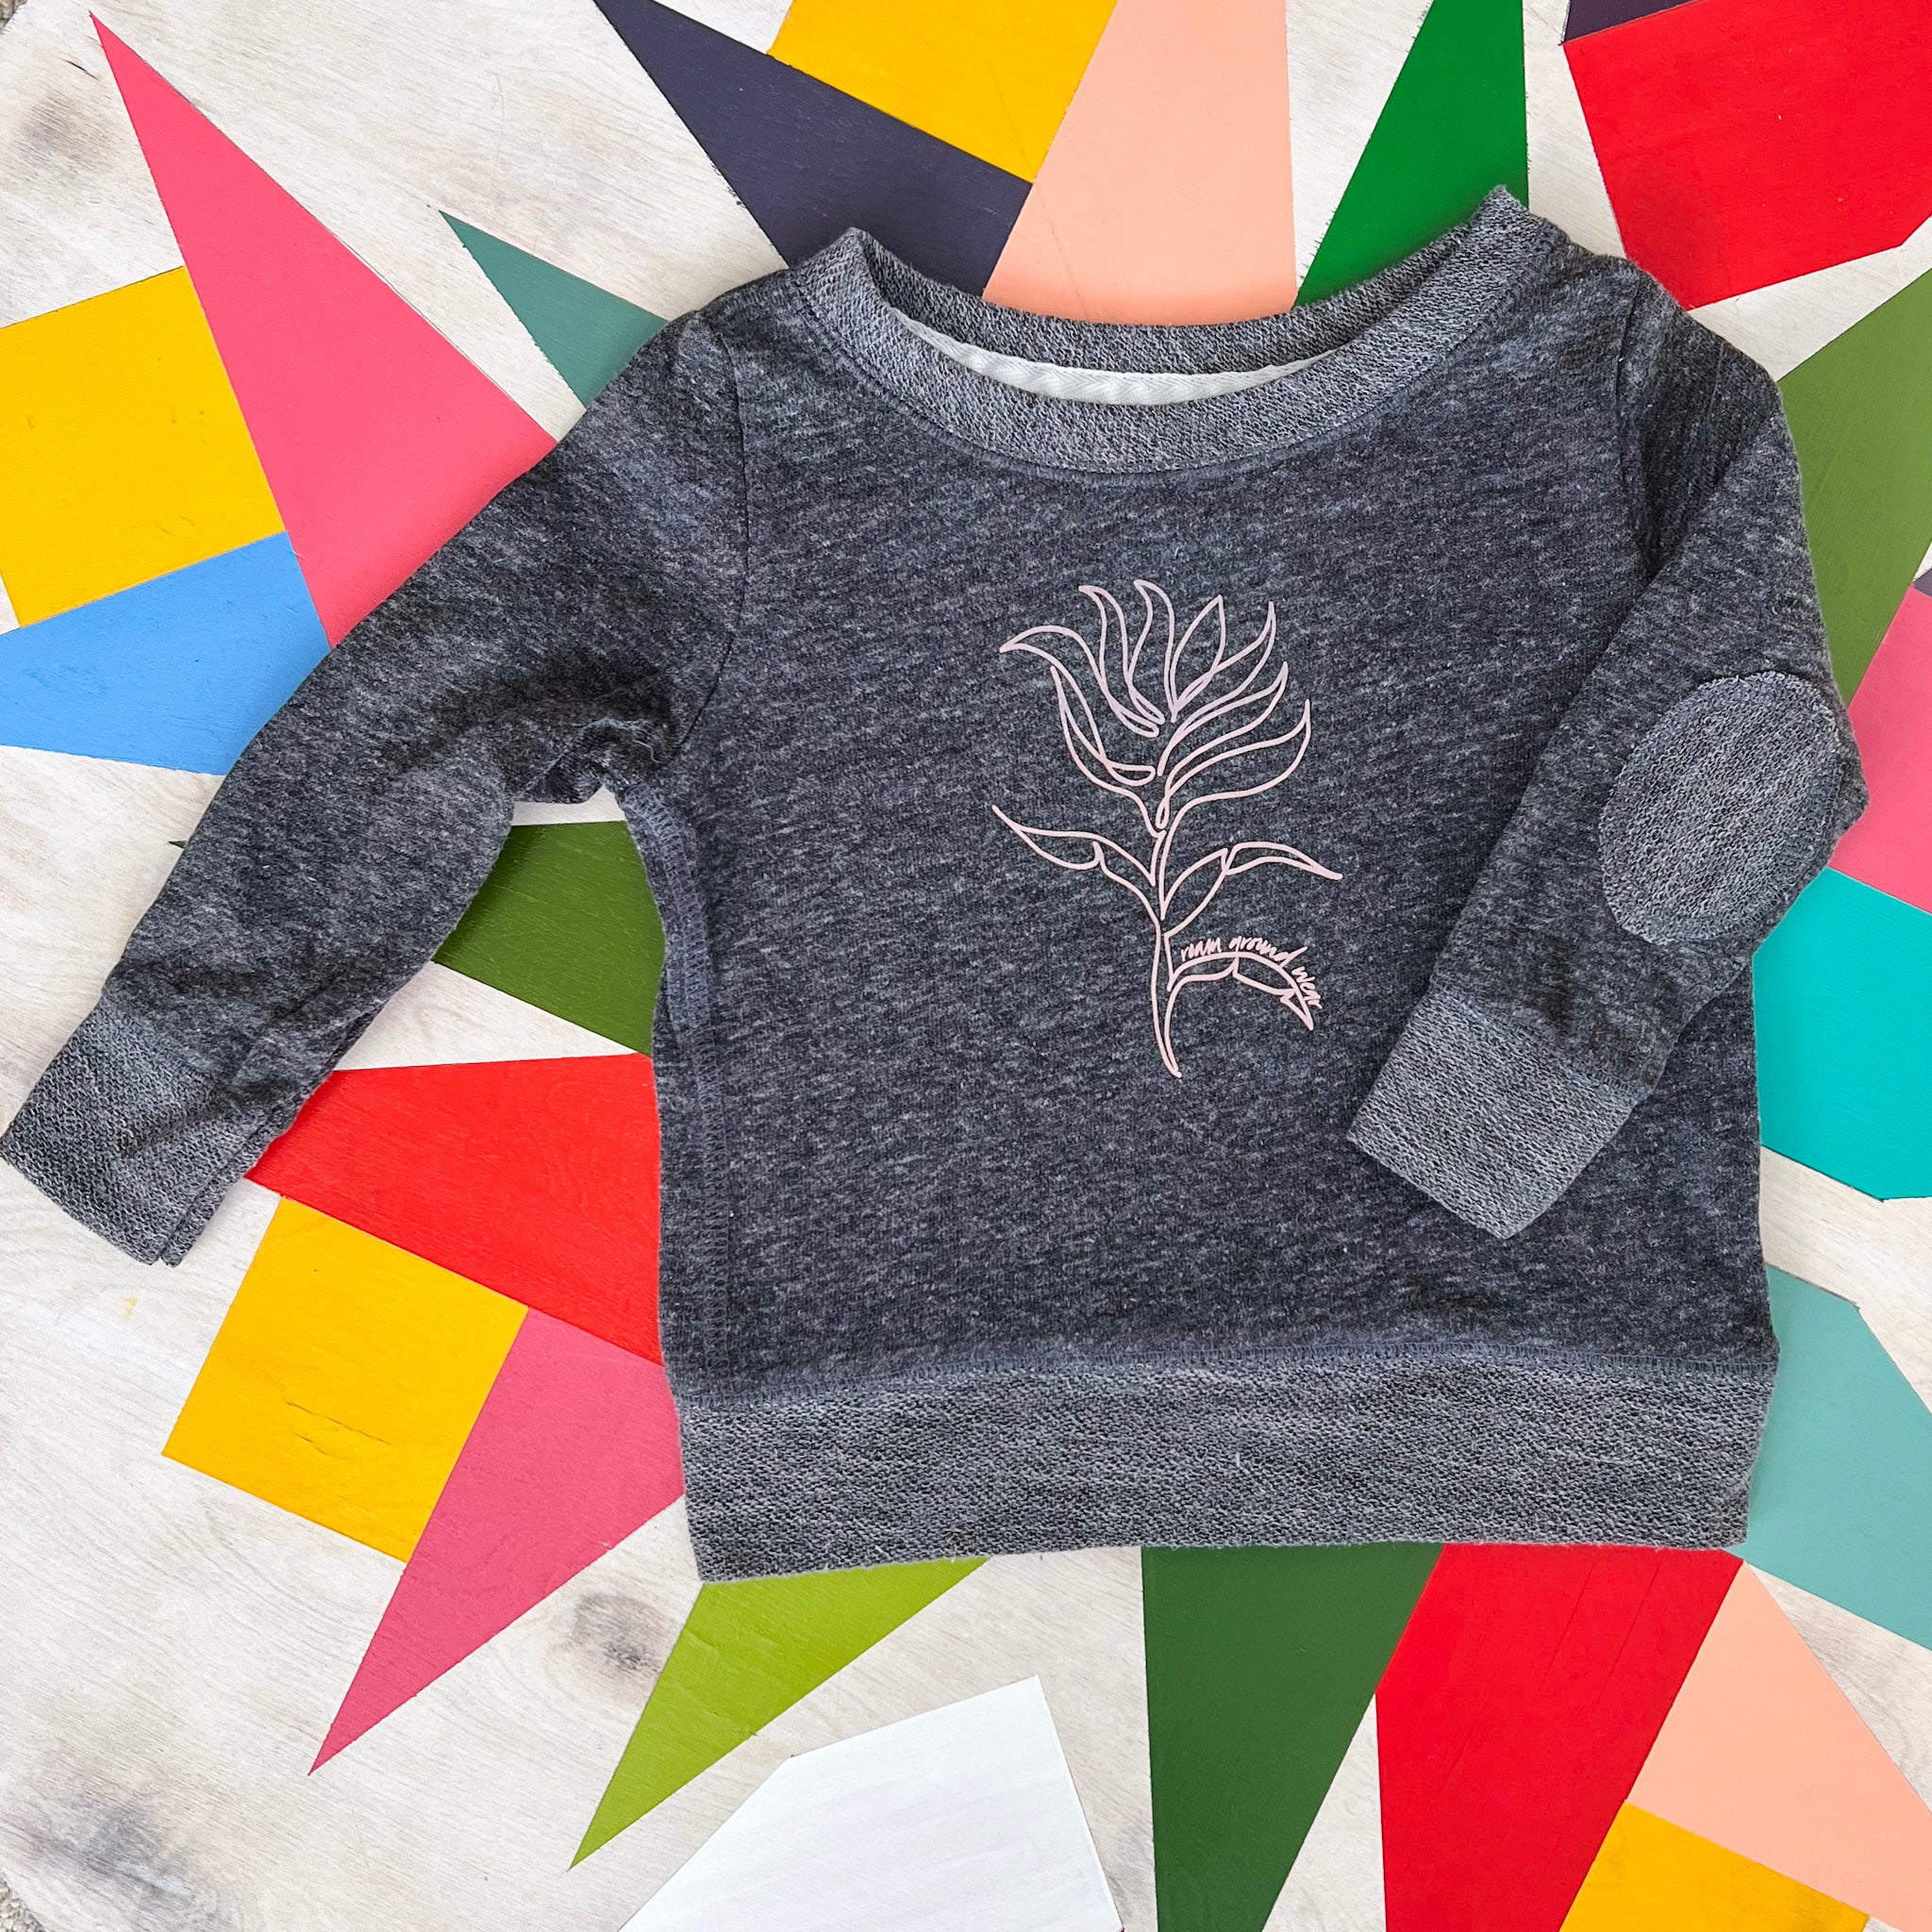 Pink Indian Paintbrush toddler and youth lightweight gray sweatshirt. Roam Around Wear is a Wyoming t-shirt company based out of Gillette, Wyoming. Artisan Designed. 